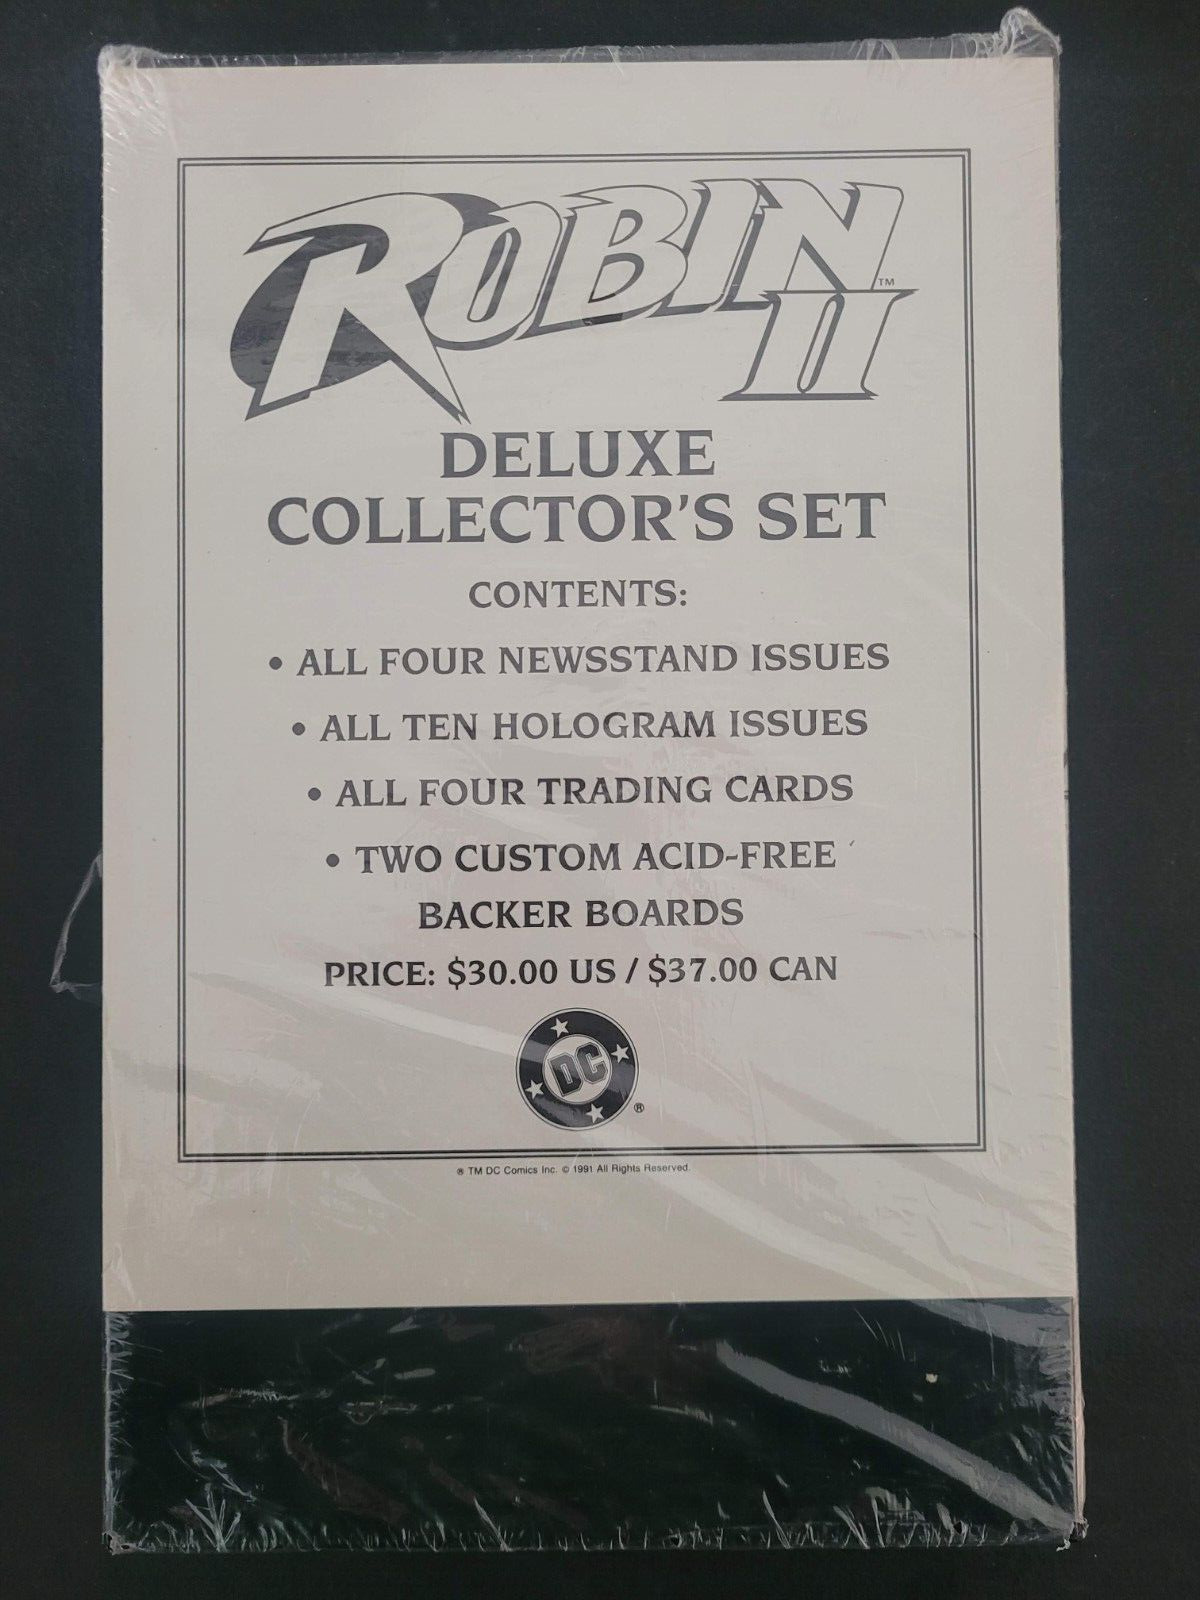 ROBIN II DELUXE COLLECTOR'S SET SLIPCASE 1991 DC COMICS FACTORY SEALED NEW